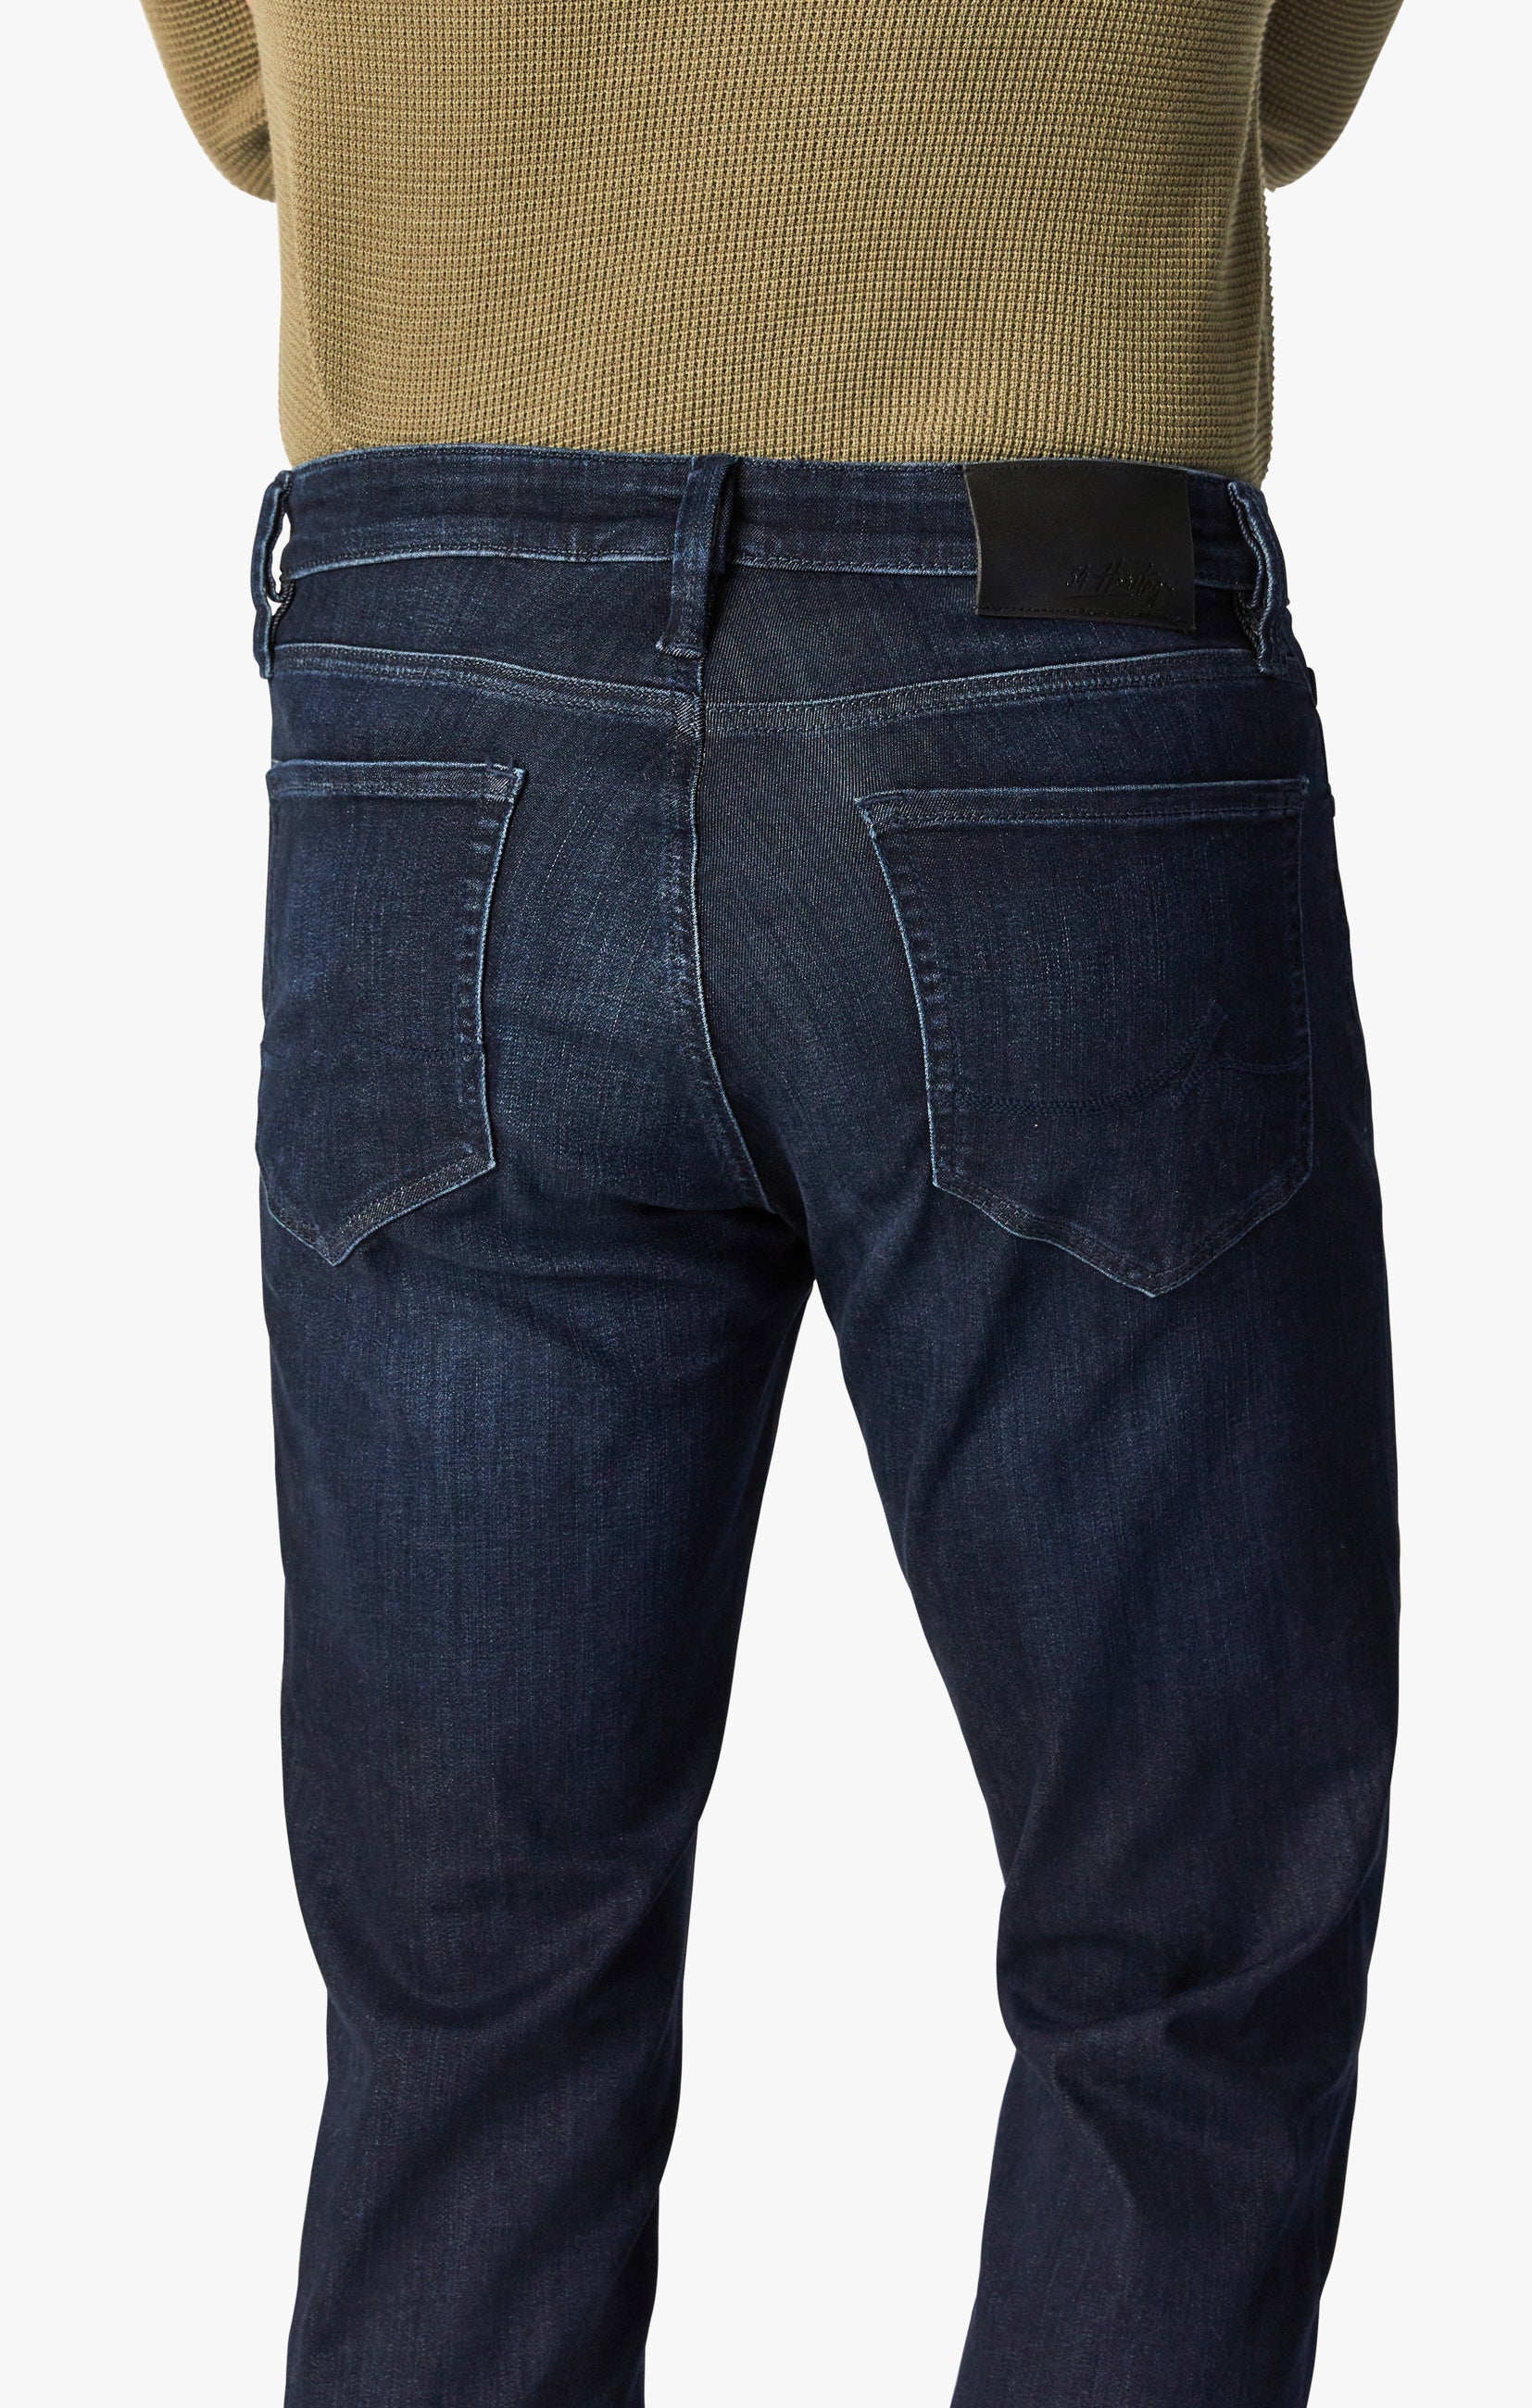 Champ Athletic Fit Jeans In Deep Urban Image 4